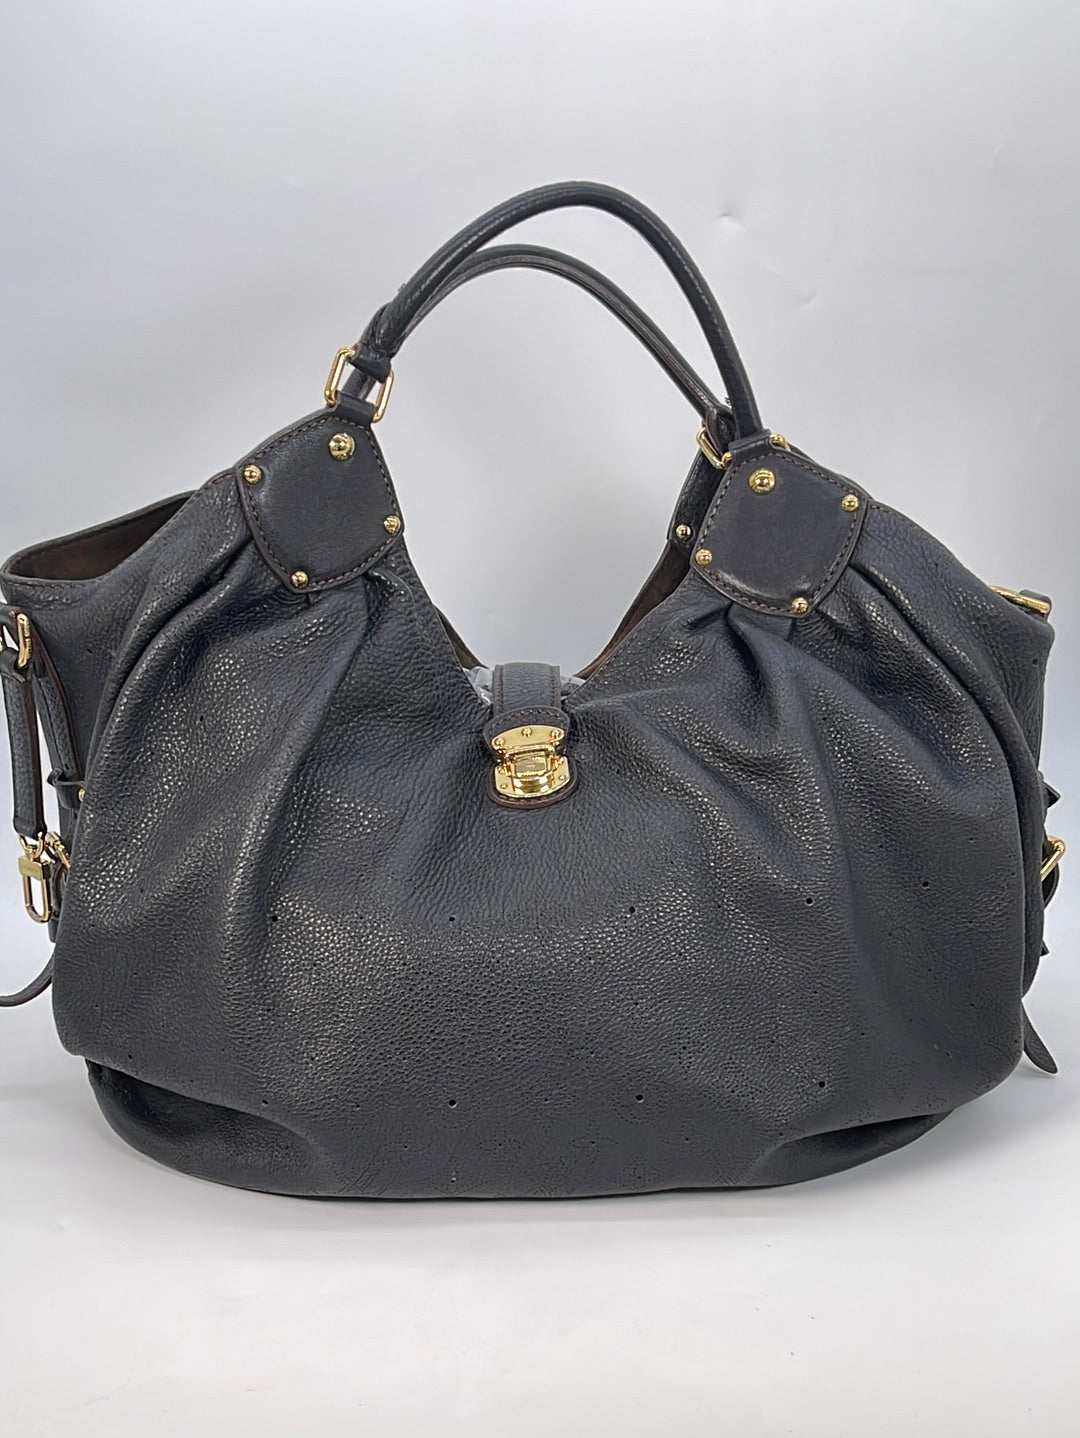 Buy Authentic Pre-owned Louis Vuitton Monogram Mahina XL Black Leather  Shoulder Tote Hobo M95547 210718 from Japan - Buy authentic Plus exclusive  items from Japan